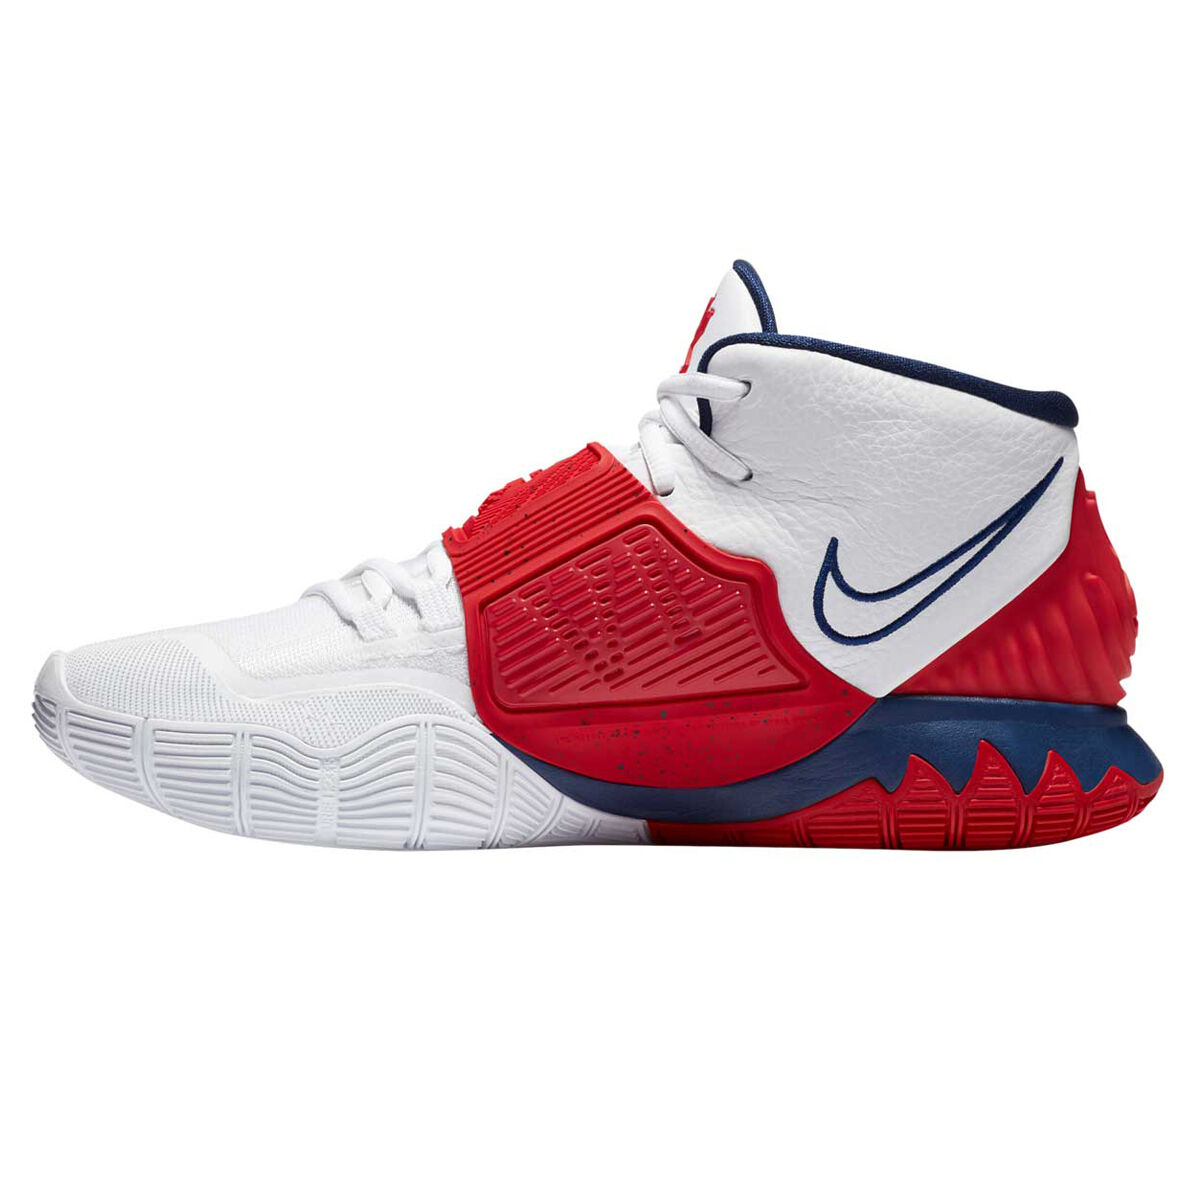 kyrie men's basketball shoes